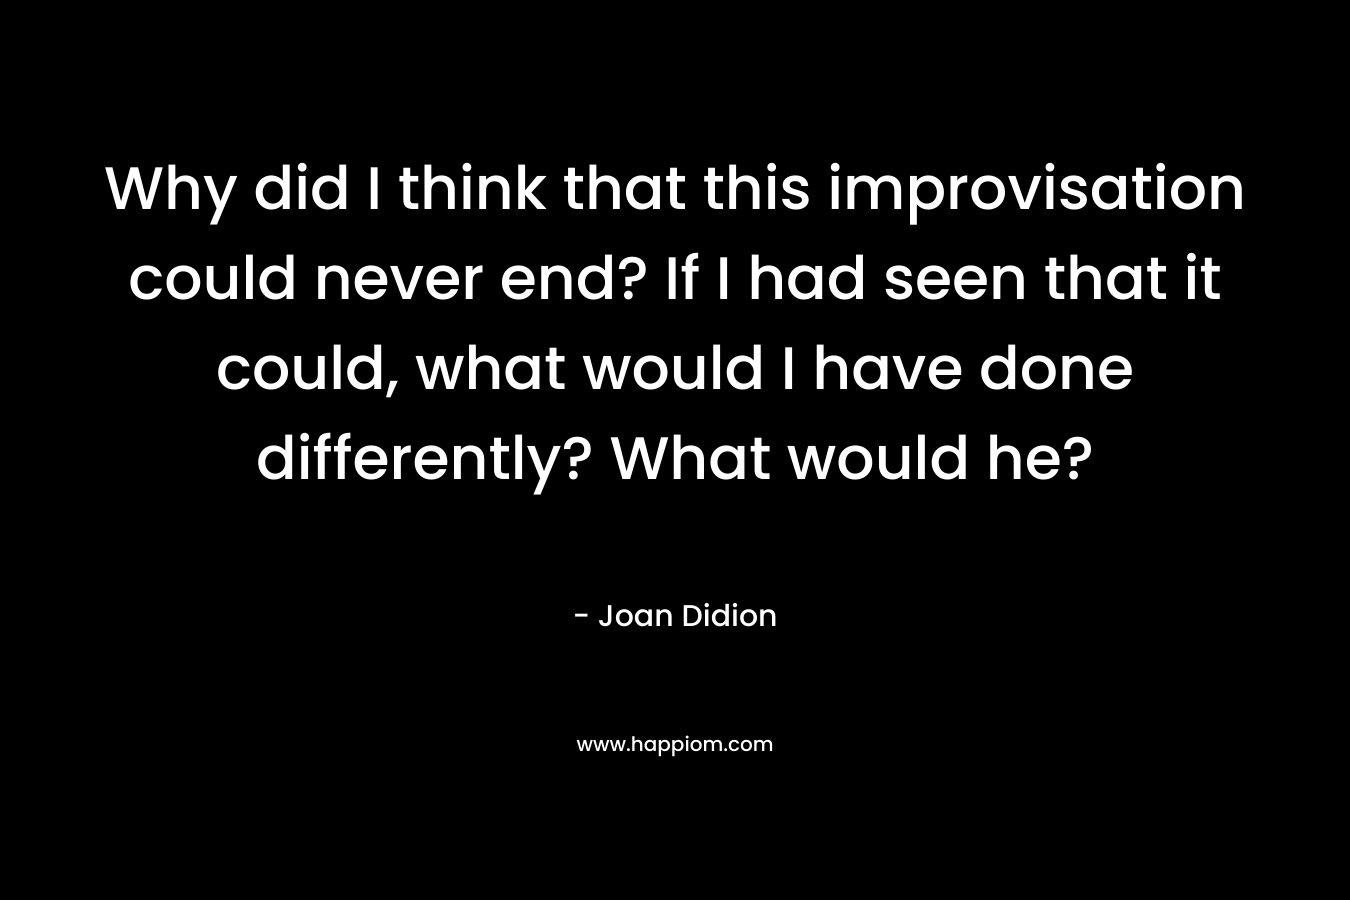 Why did I think that this improvisation could never end? If I had seen that it could, what would I have done differently? What would he? – Joan Didion